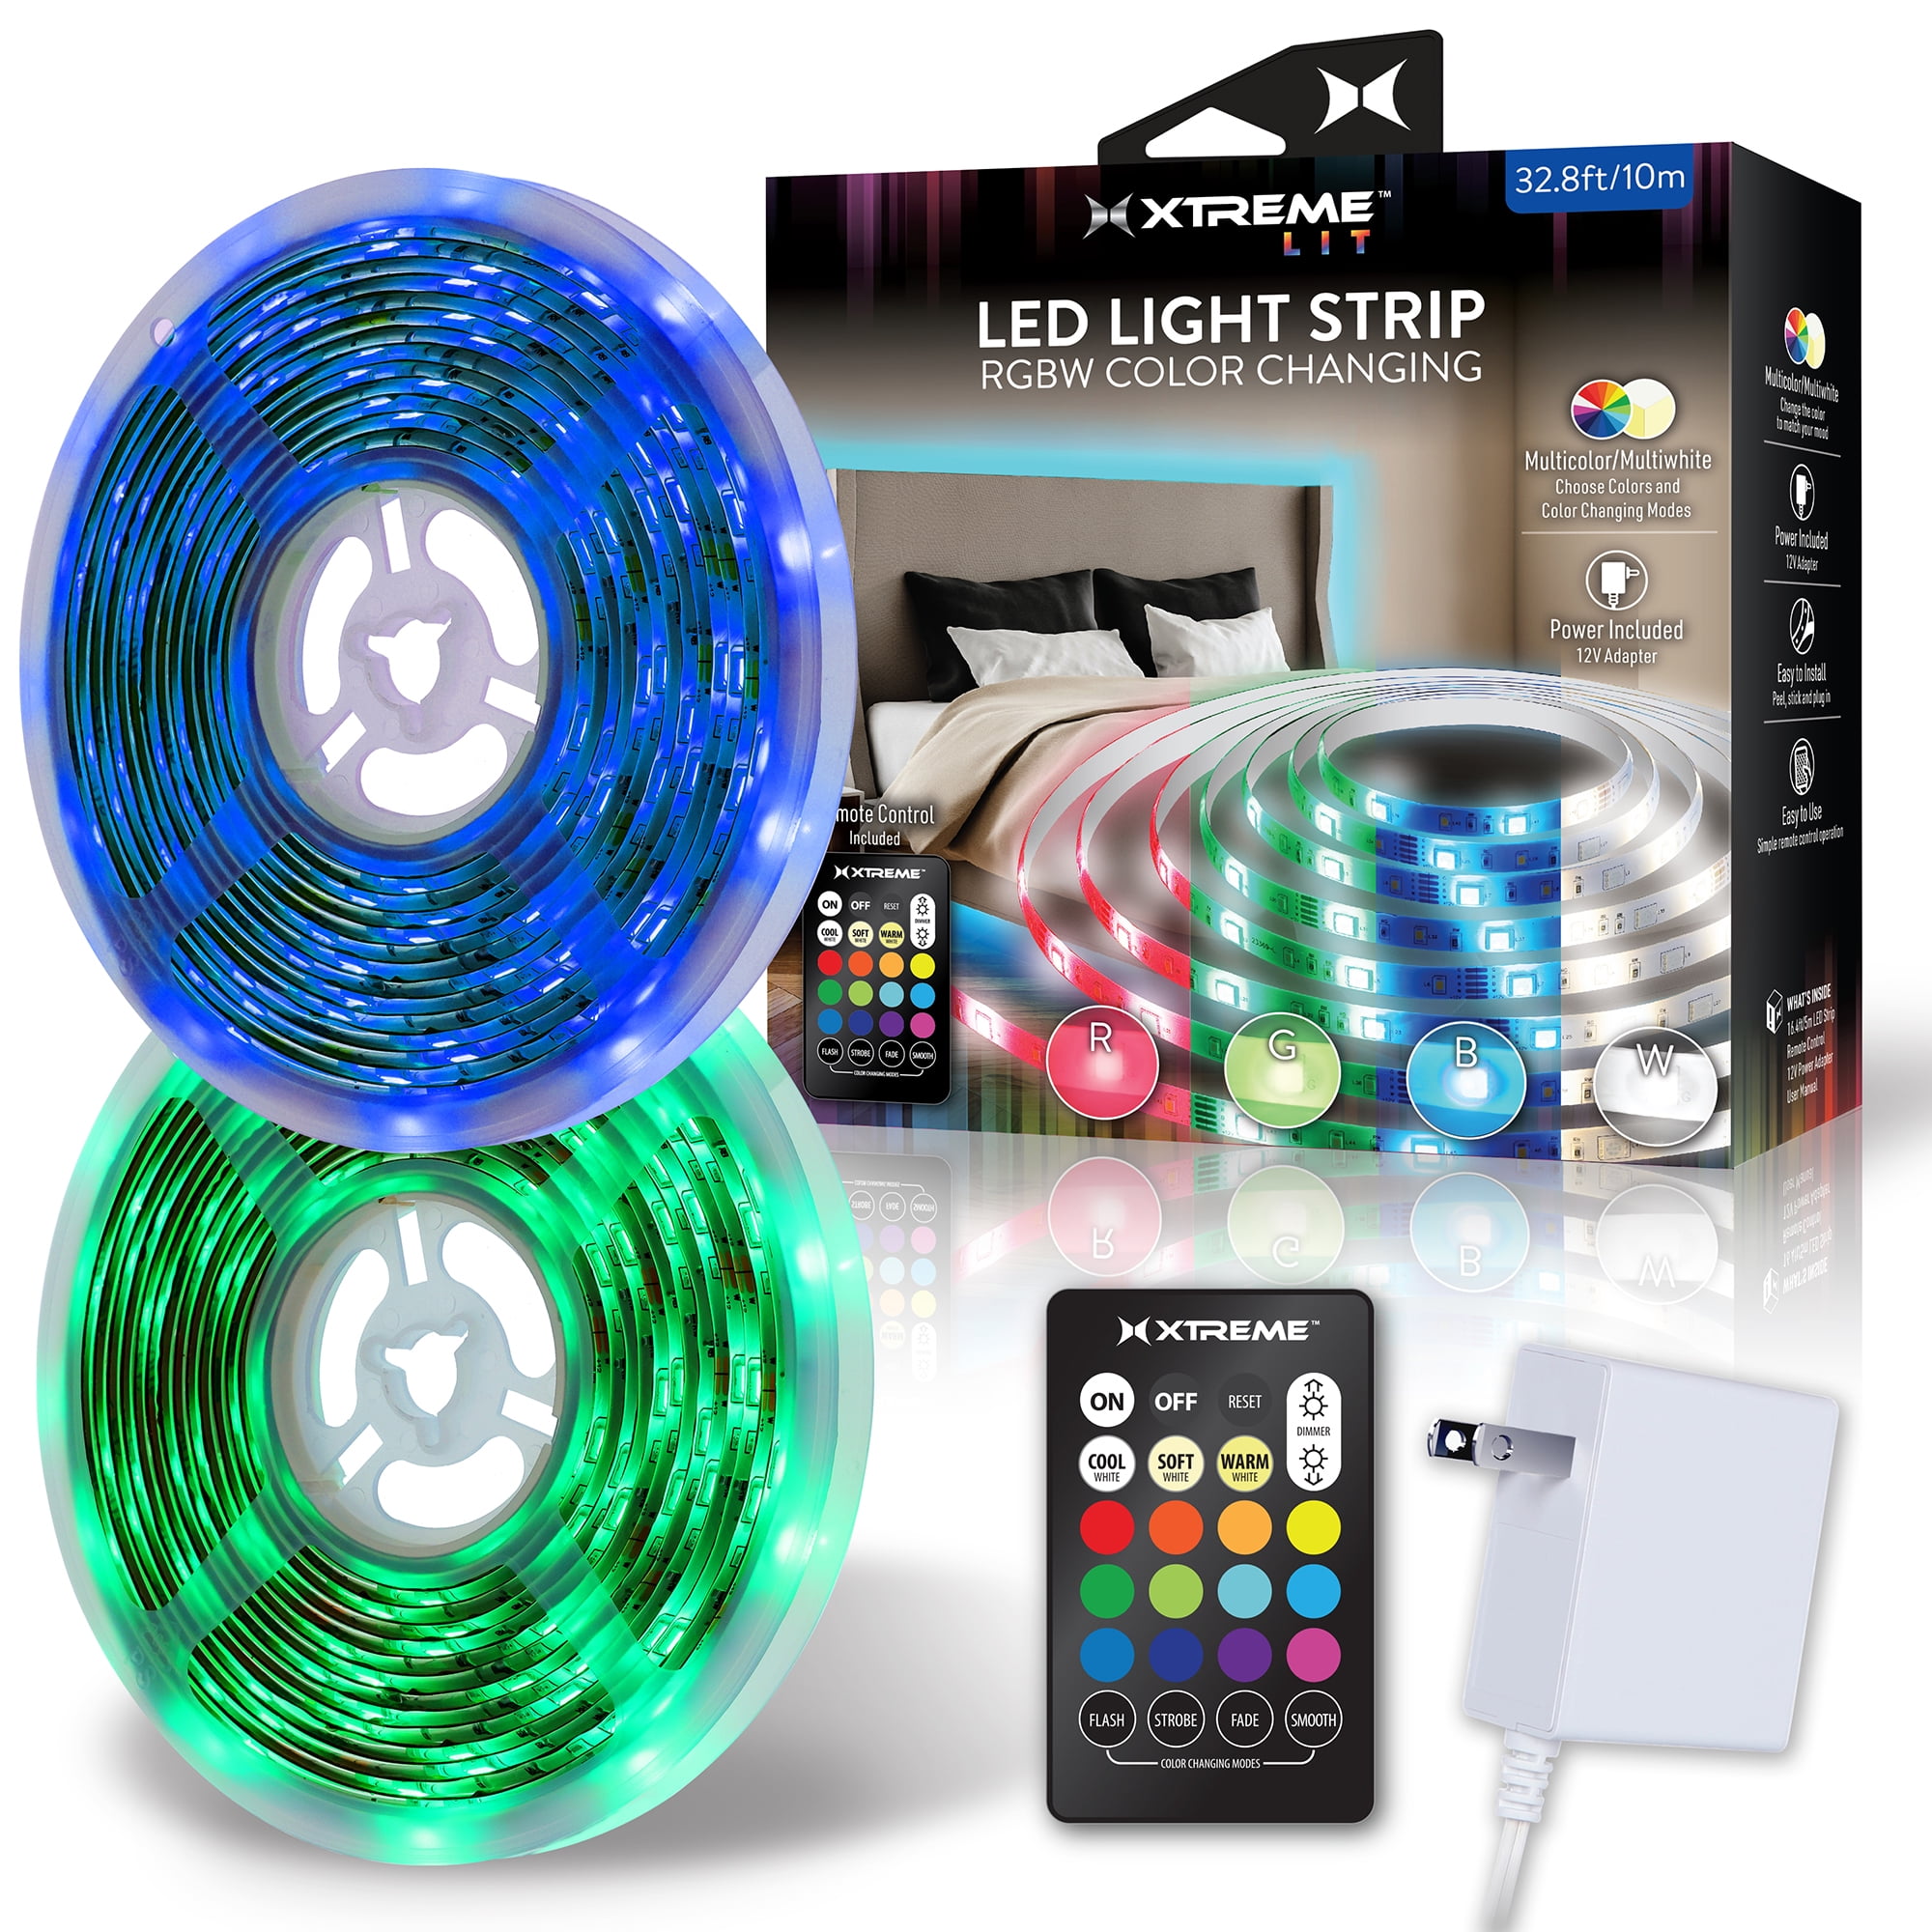 Xtreme Lit 32.8ft RGBW Color-Changing Indoor Light Strip, Remote Control, Powered by 12V Adapter - Walmart.com